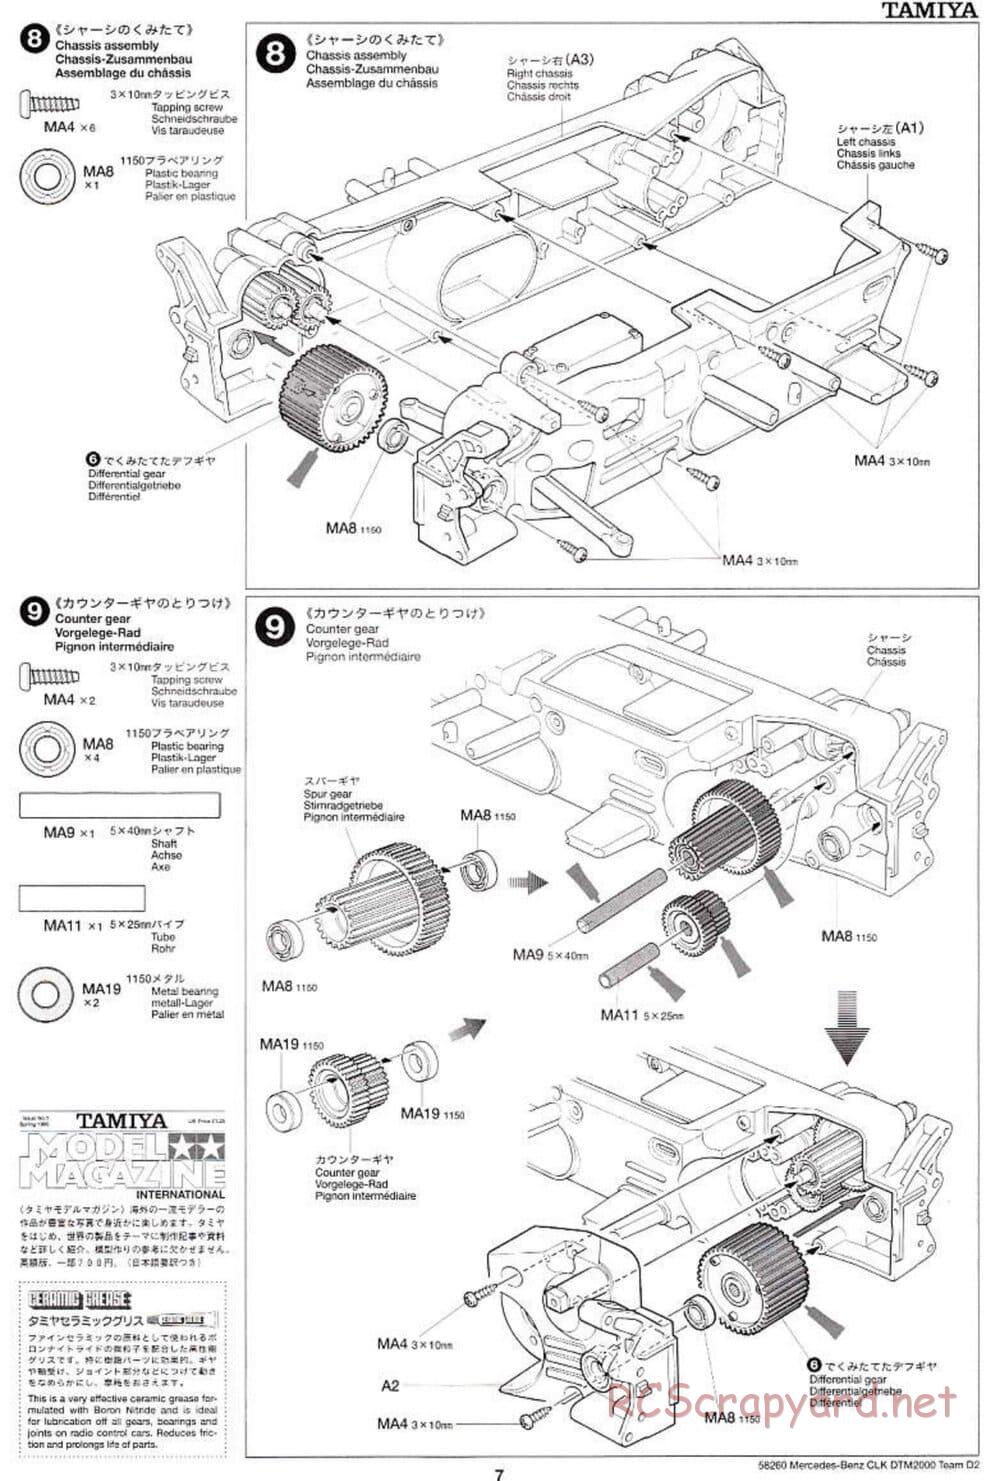 Tamiya - Mercedes Benz CLK DTM 2000 Team D2 - TL-01 Chassis - Manual - Page 7